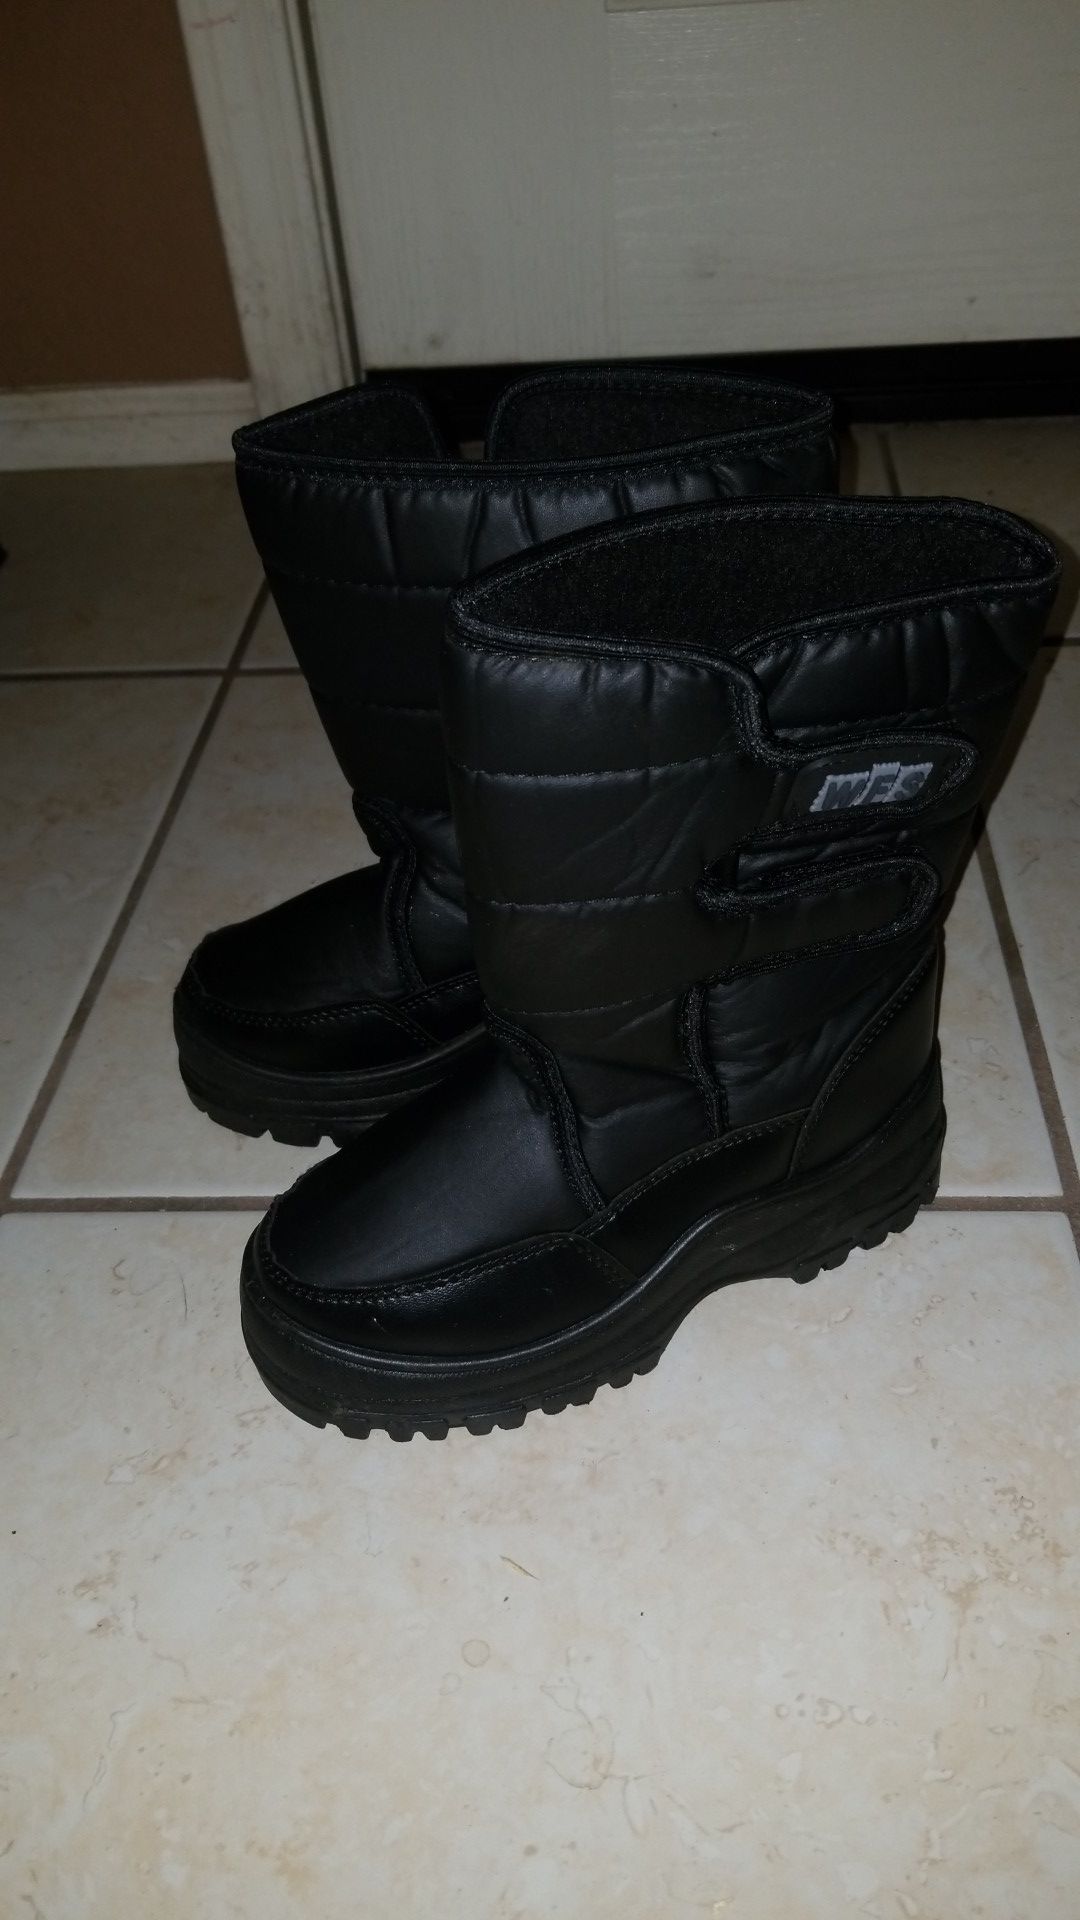 Snow boots kid's...size 2